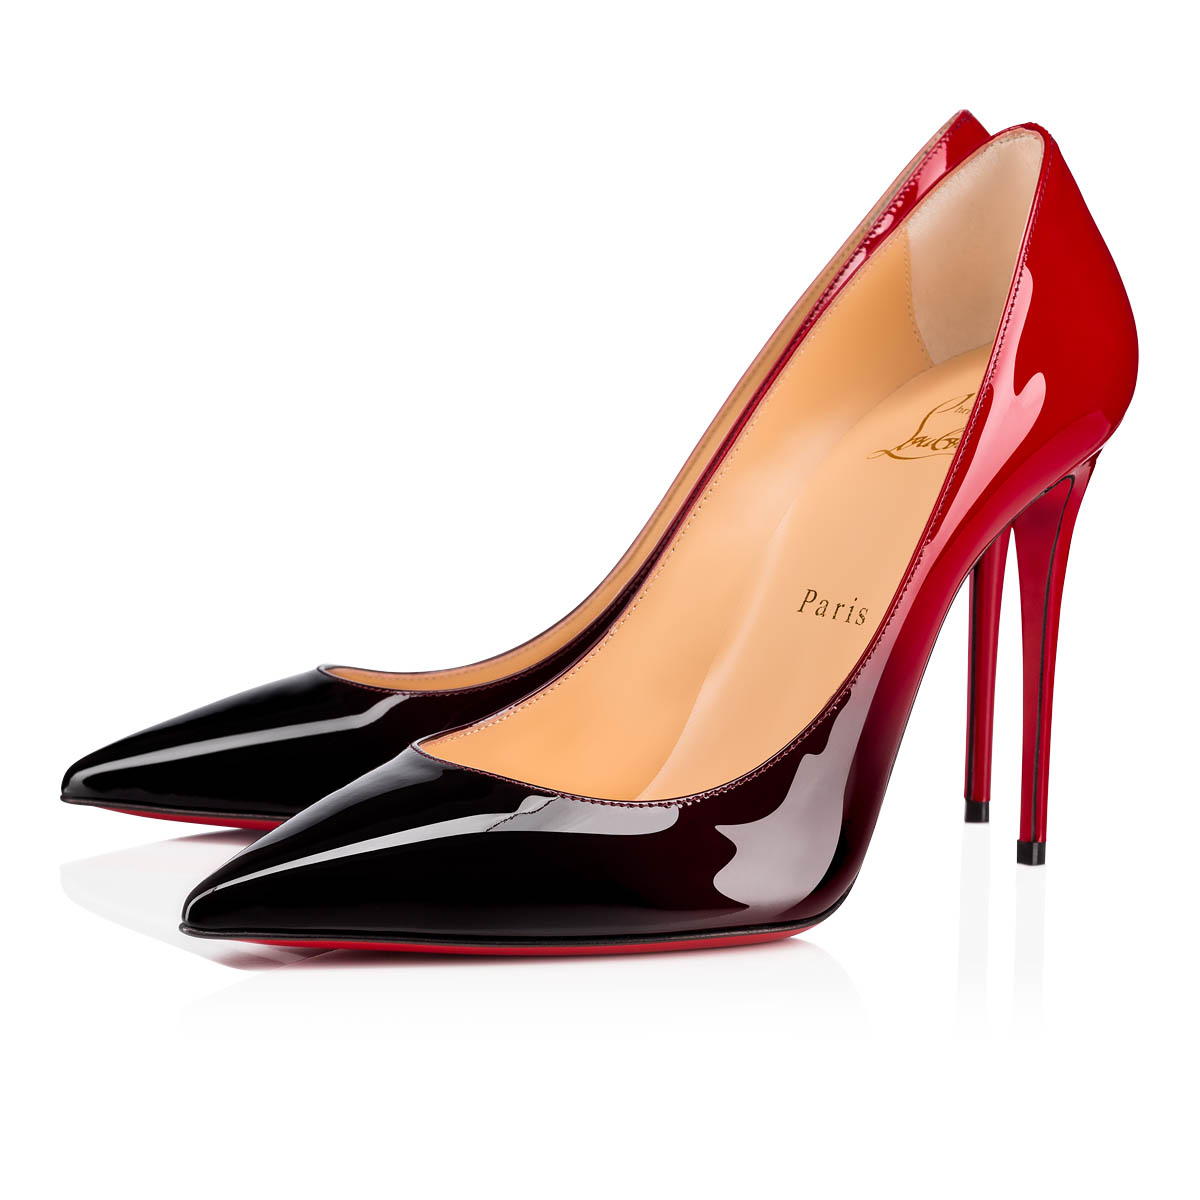 Kate - 100 mm - calf leather - Black-Red - Christian